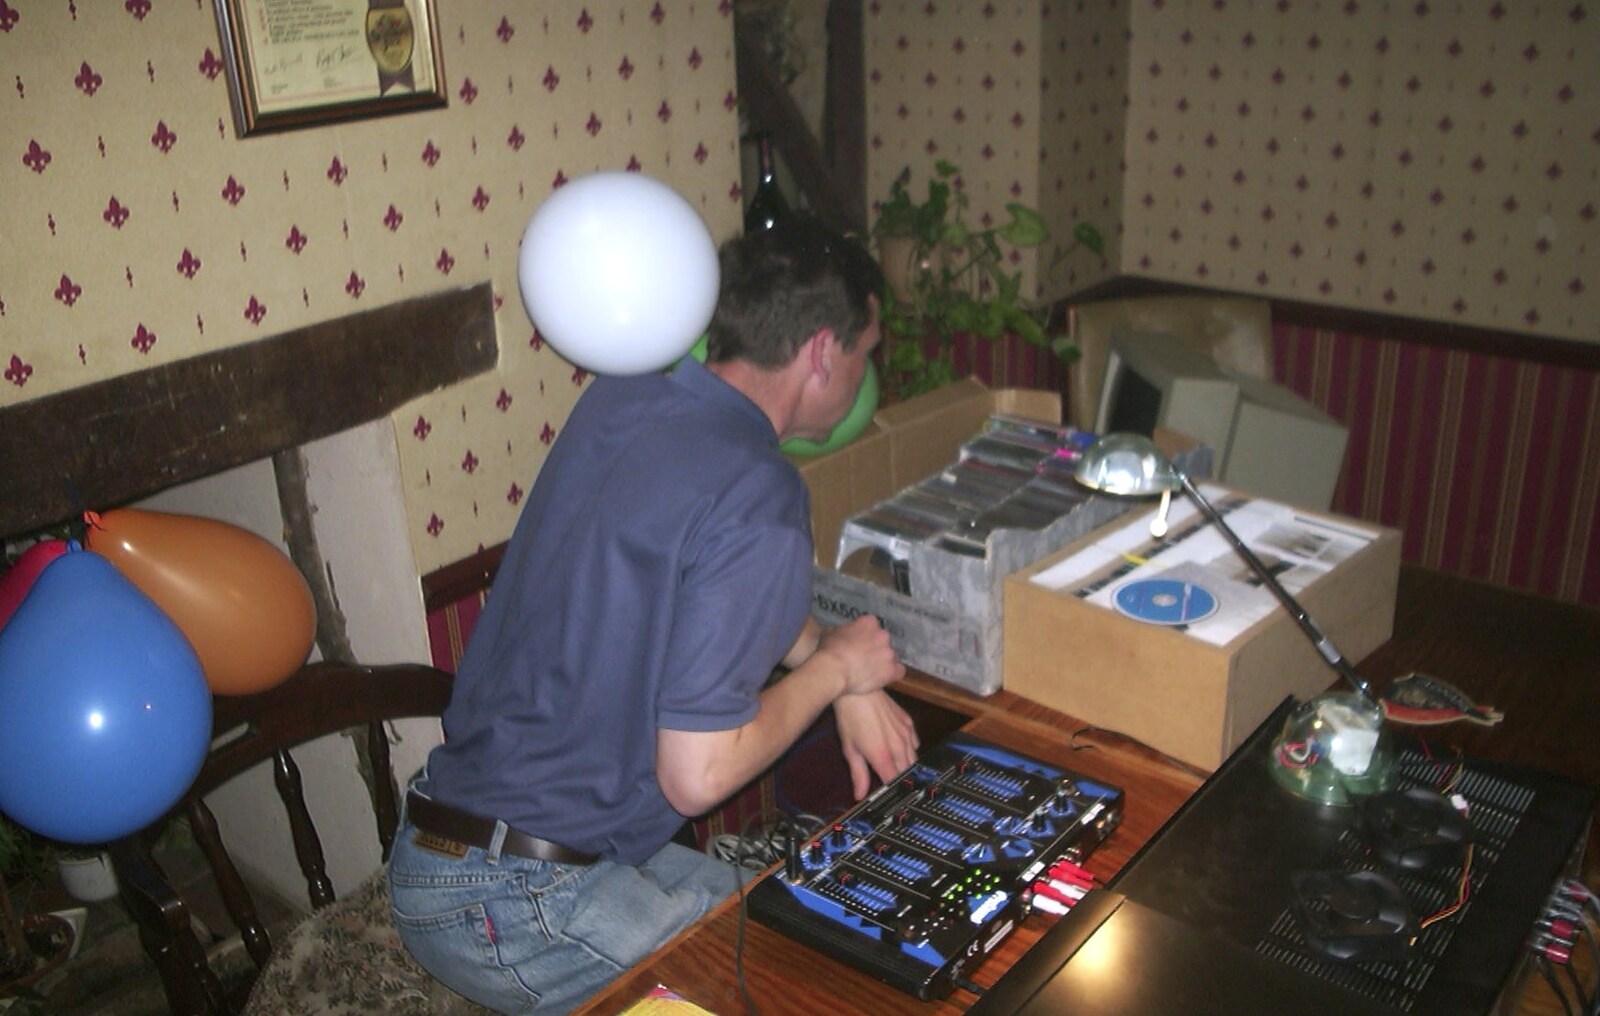 Apple checks the CDs out from Neil's 30th Birthday at the Swan Inn, Brome, Suffolk - 5th April 2003